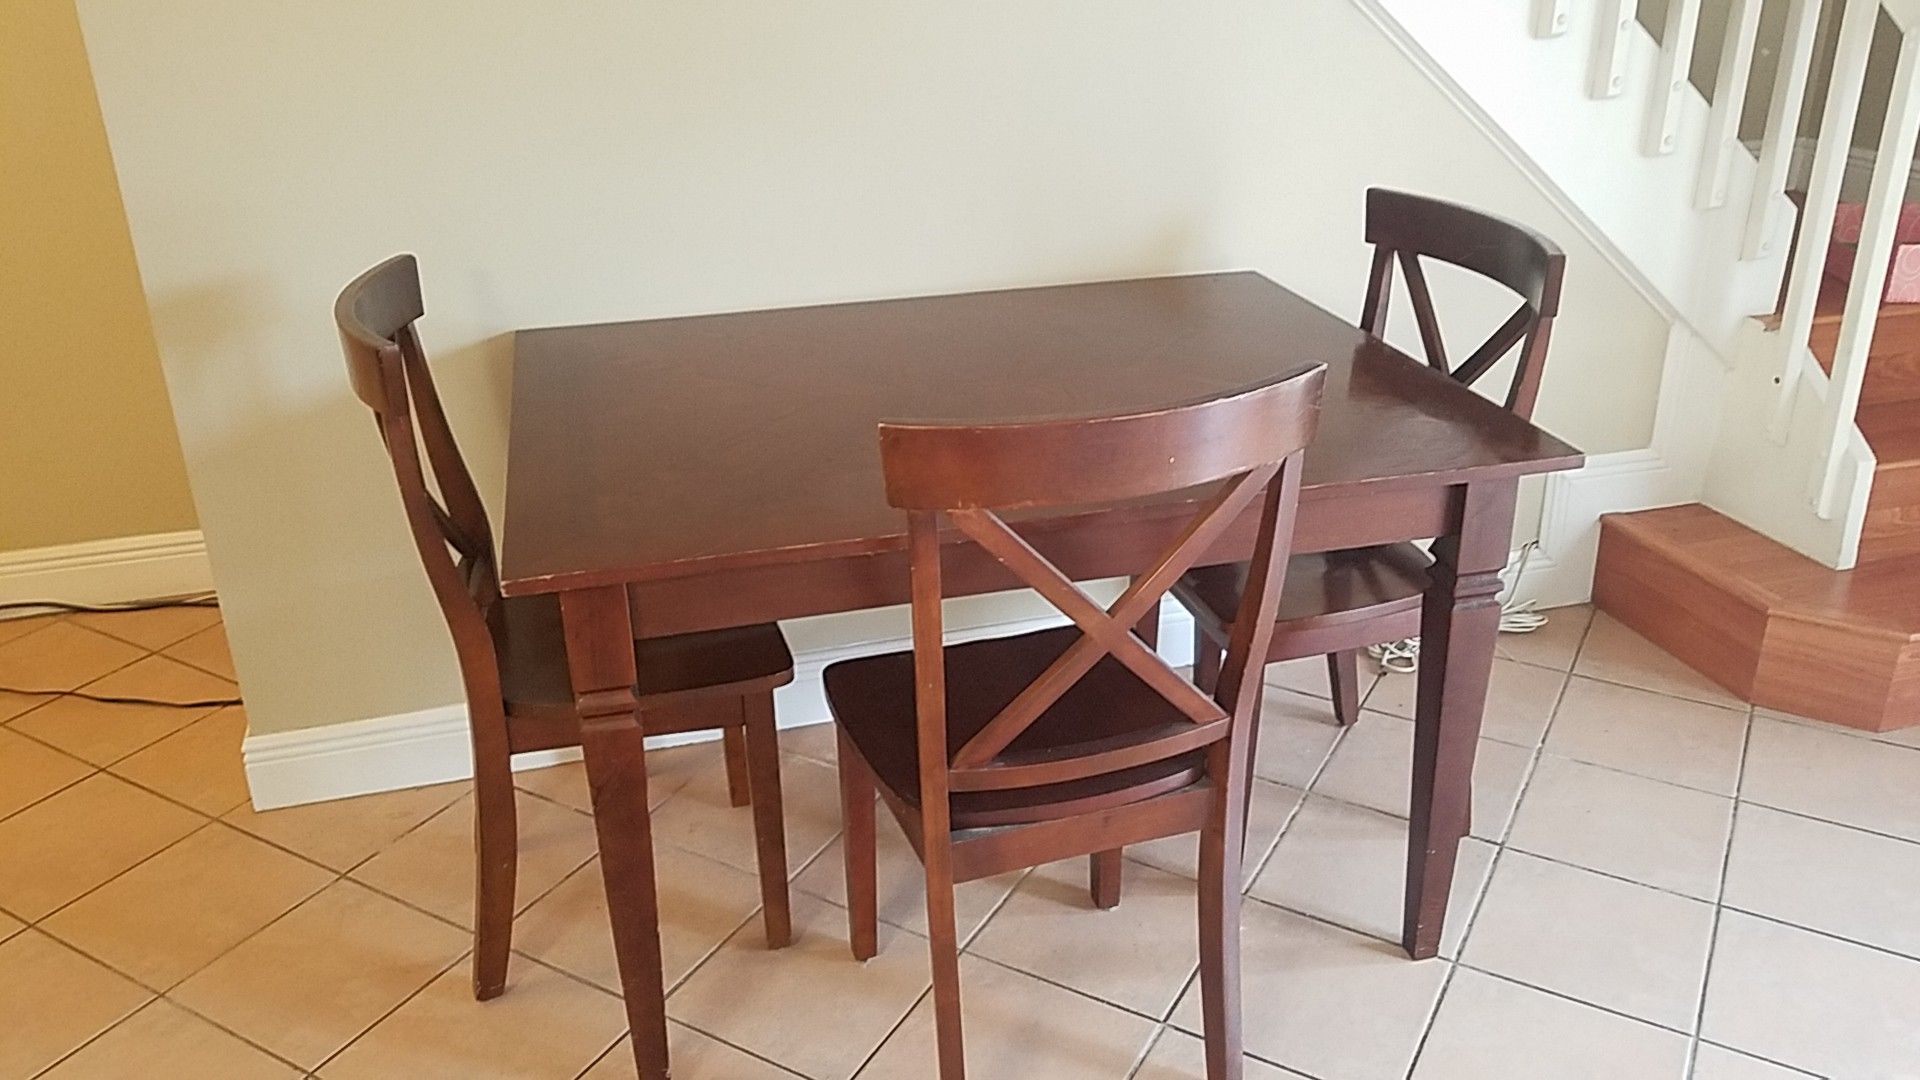 Kitchen or small dining room table 3'x4' and 3 chairs